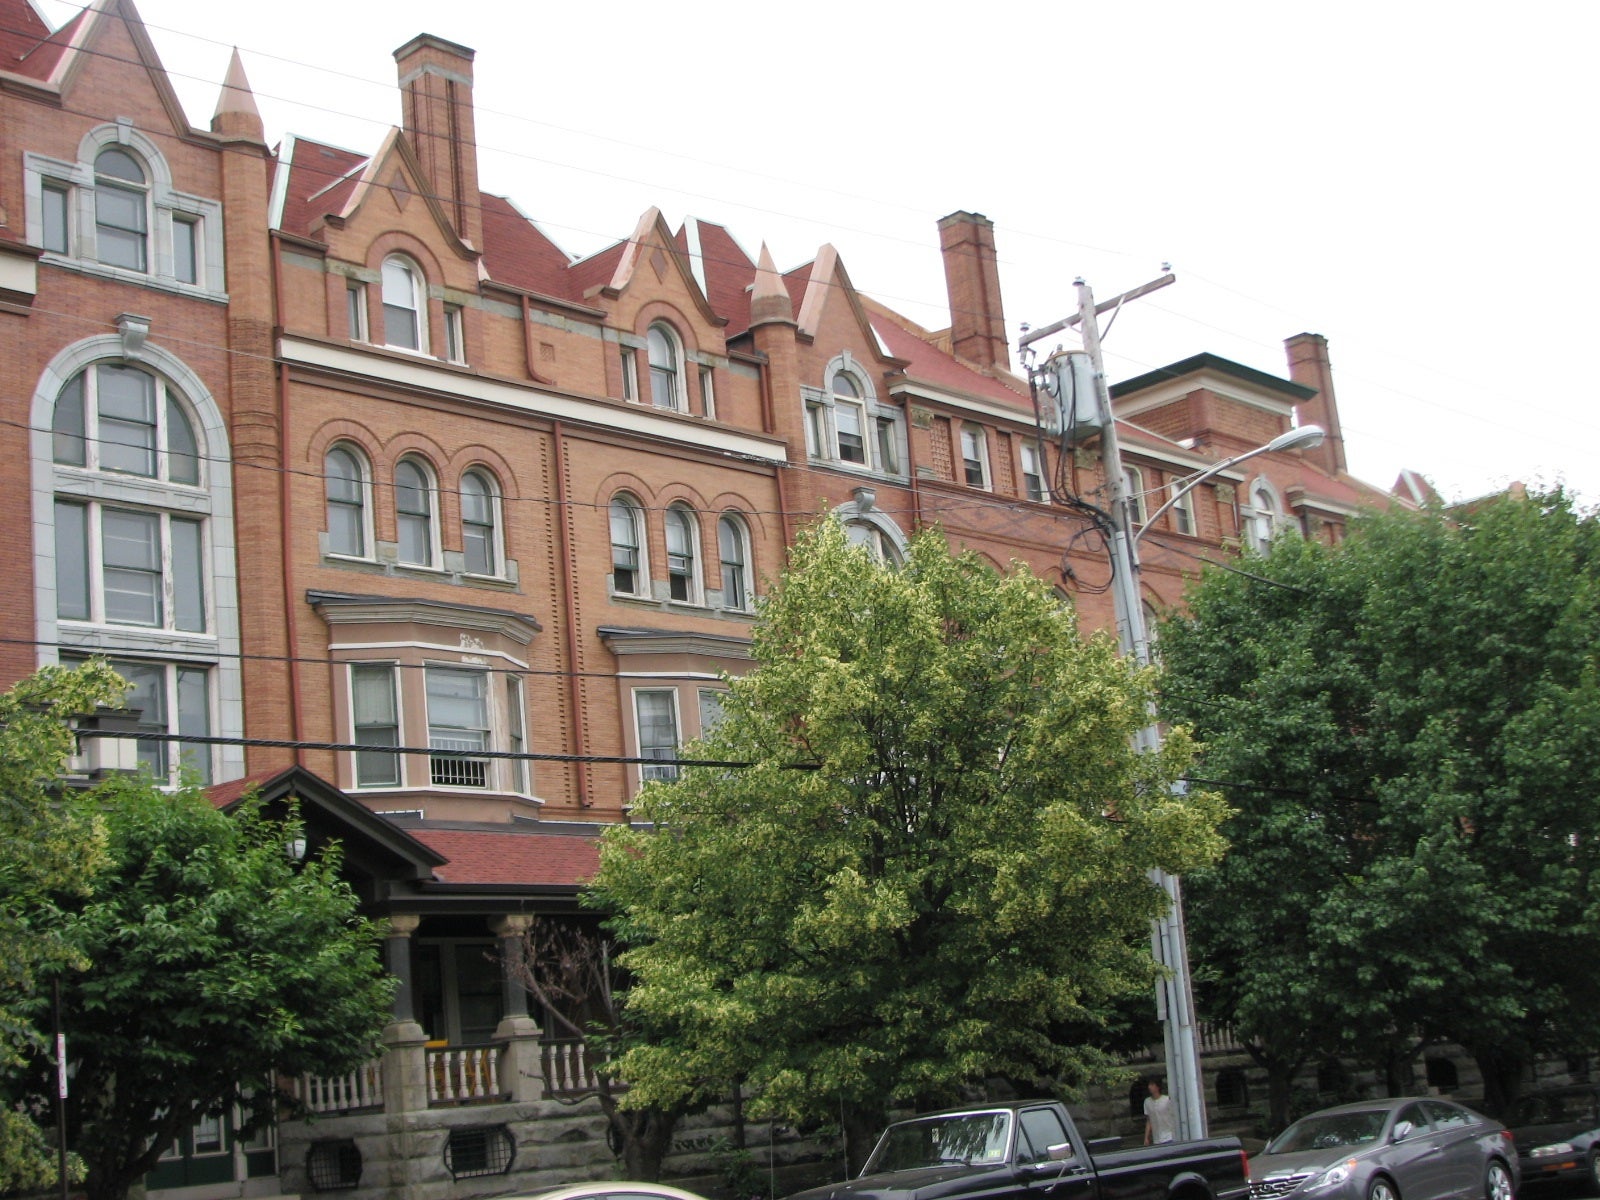 Milligan and Webber filled the space between the houses with stair towers, defined by exterior granite arches.